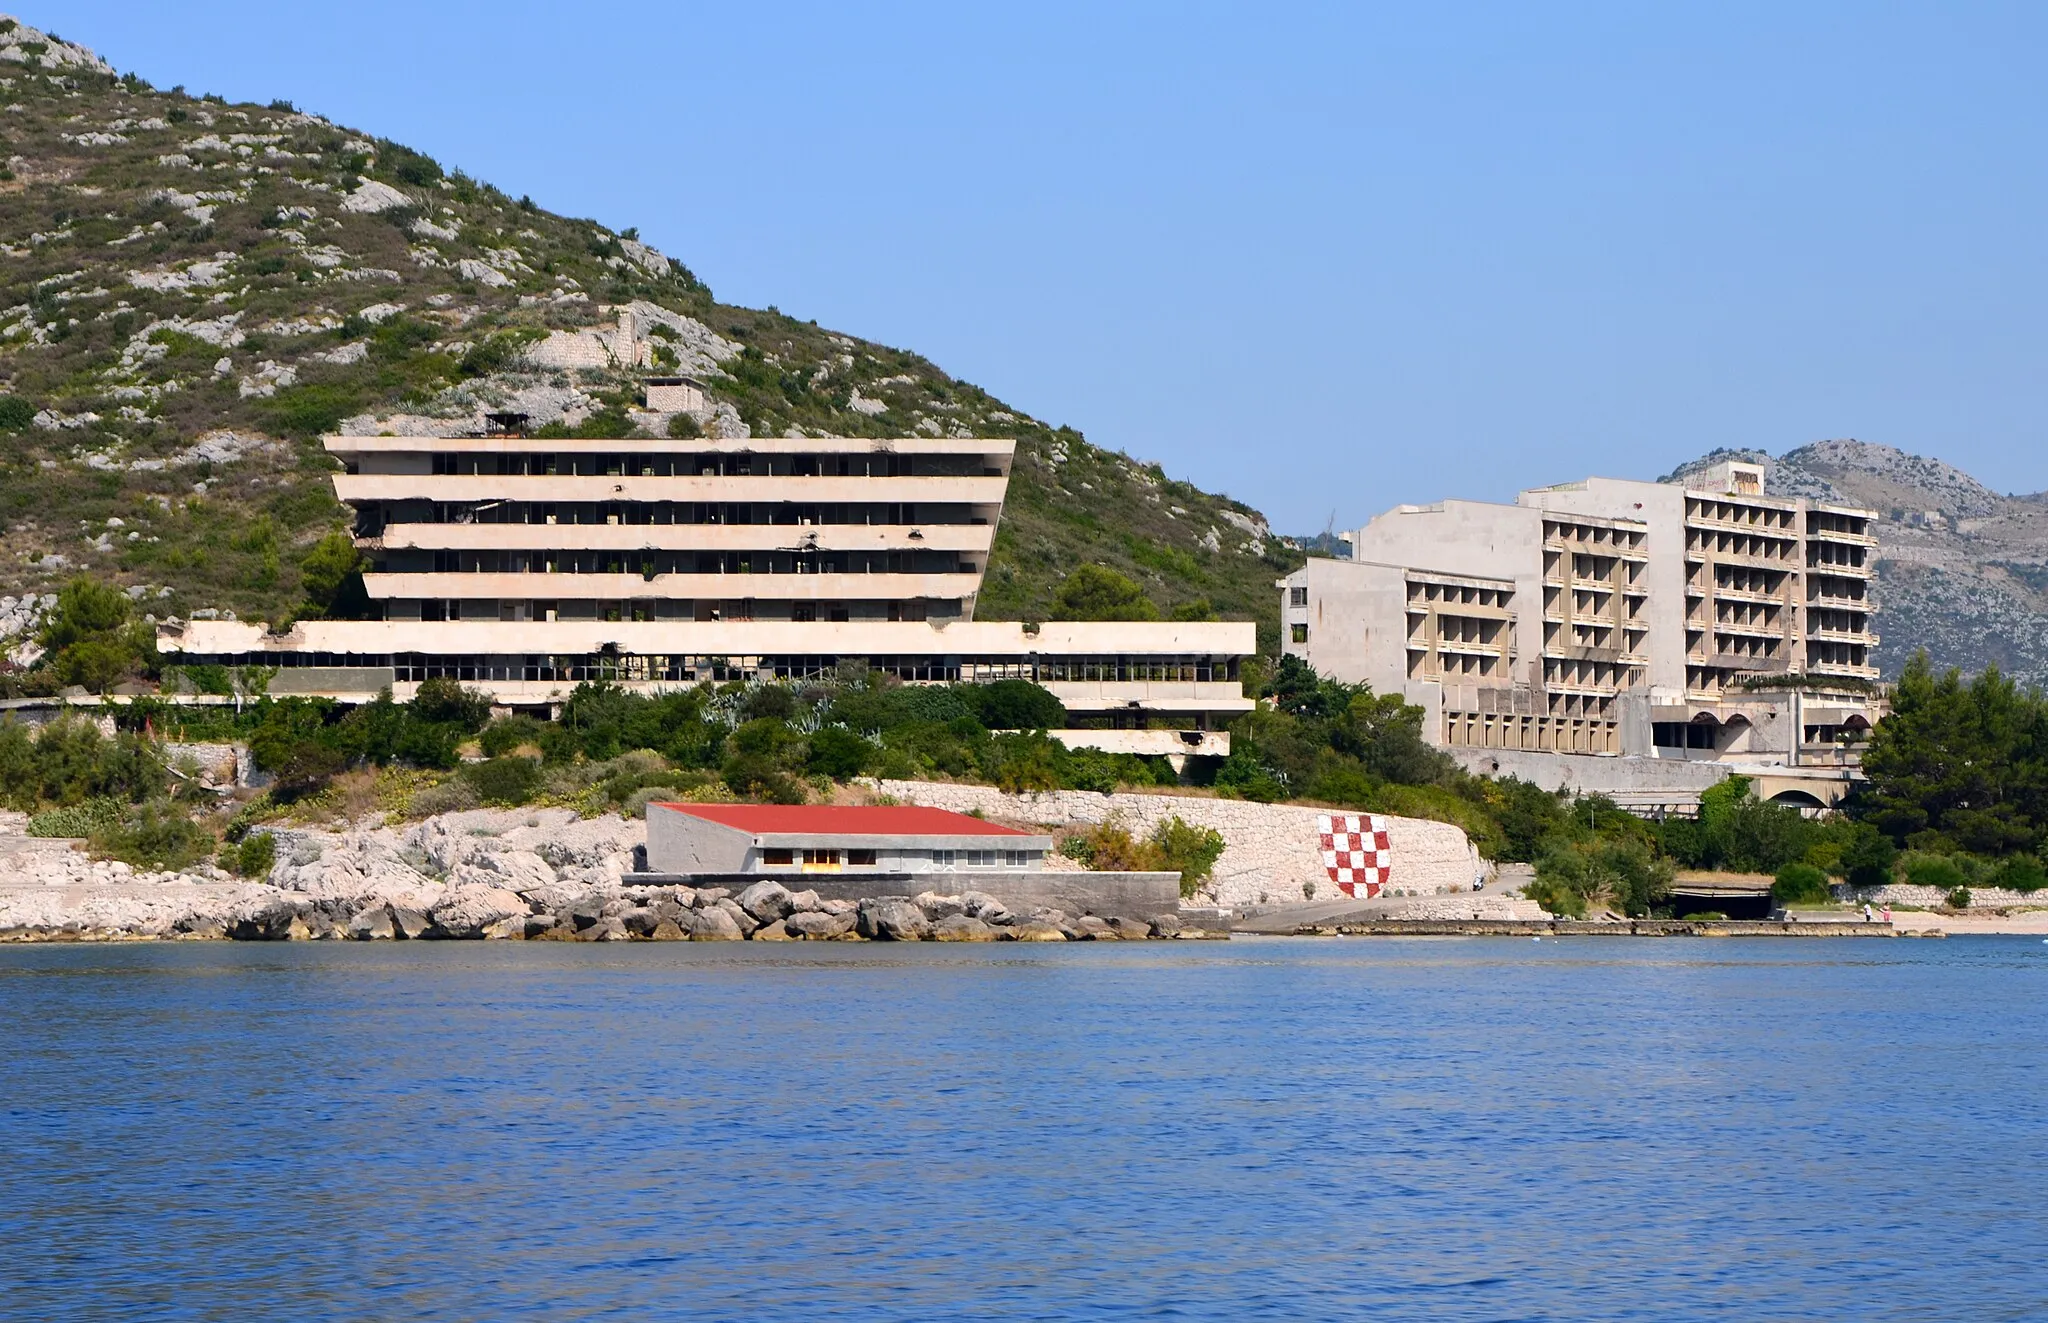 Photo showing: Hotels Pelegrin (on the left side) and Kupari (on the right side) in Kupari (Croatia), abandoned during the Croatian War of Independence, in 1991.